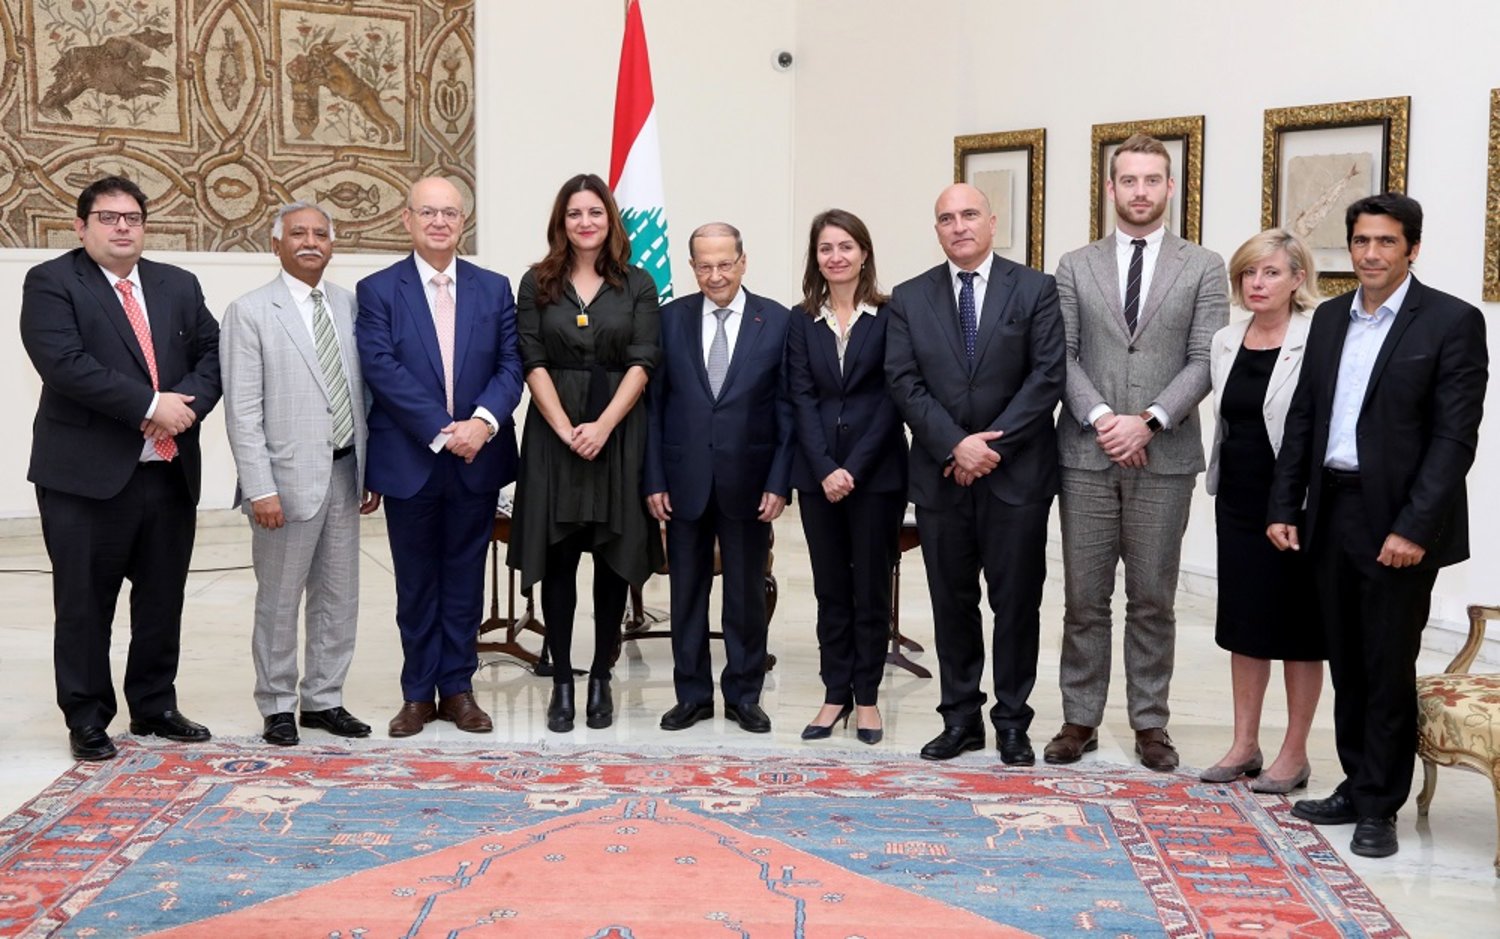 Lebanese President Michel Aoun during his meeting with a delegation from the European Parliament for Relations with the Arab Mashreq countries led by Marisa Mattias. (Dalati & Nohra)